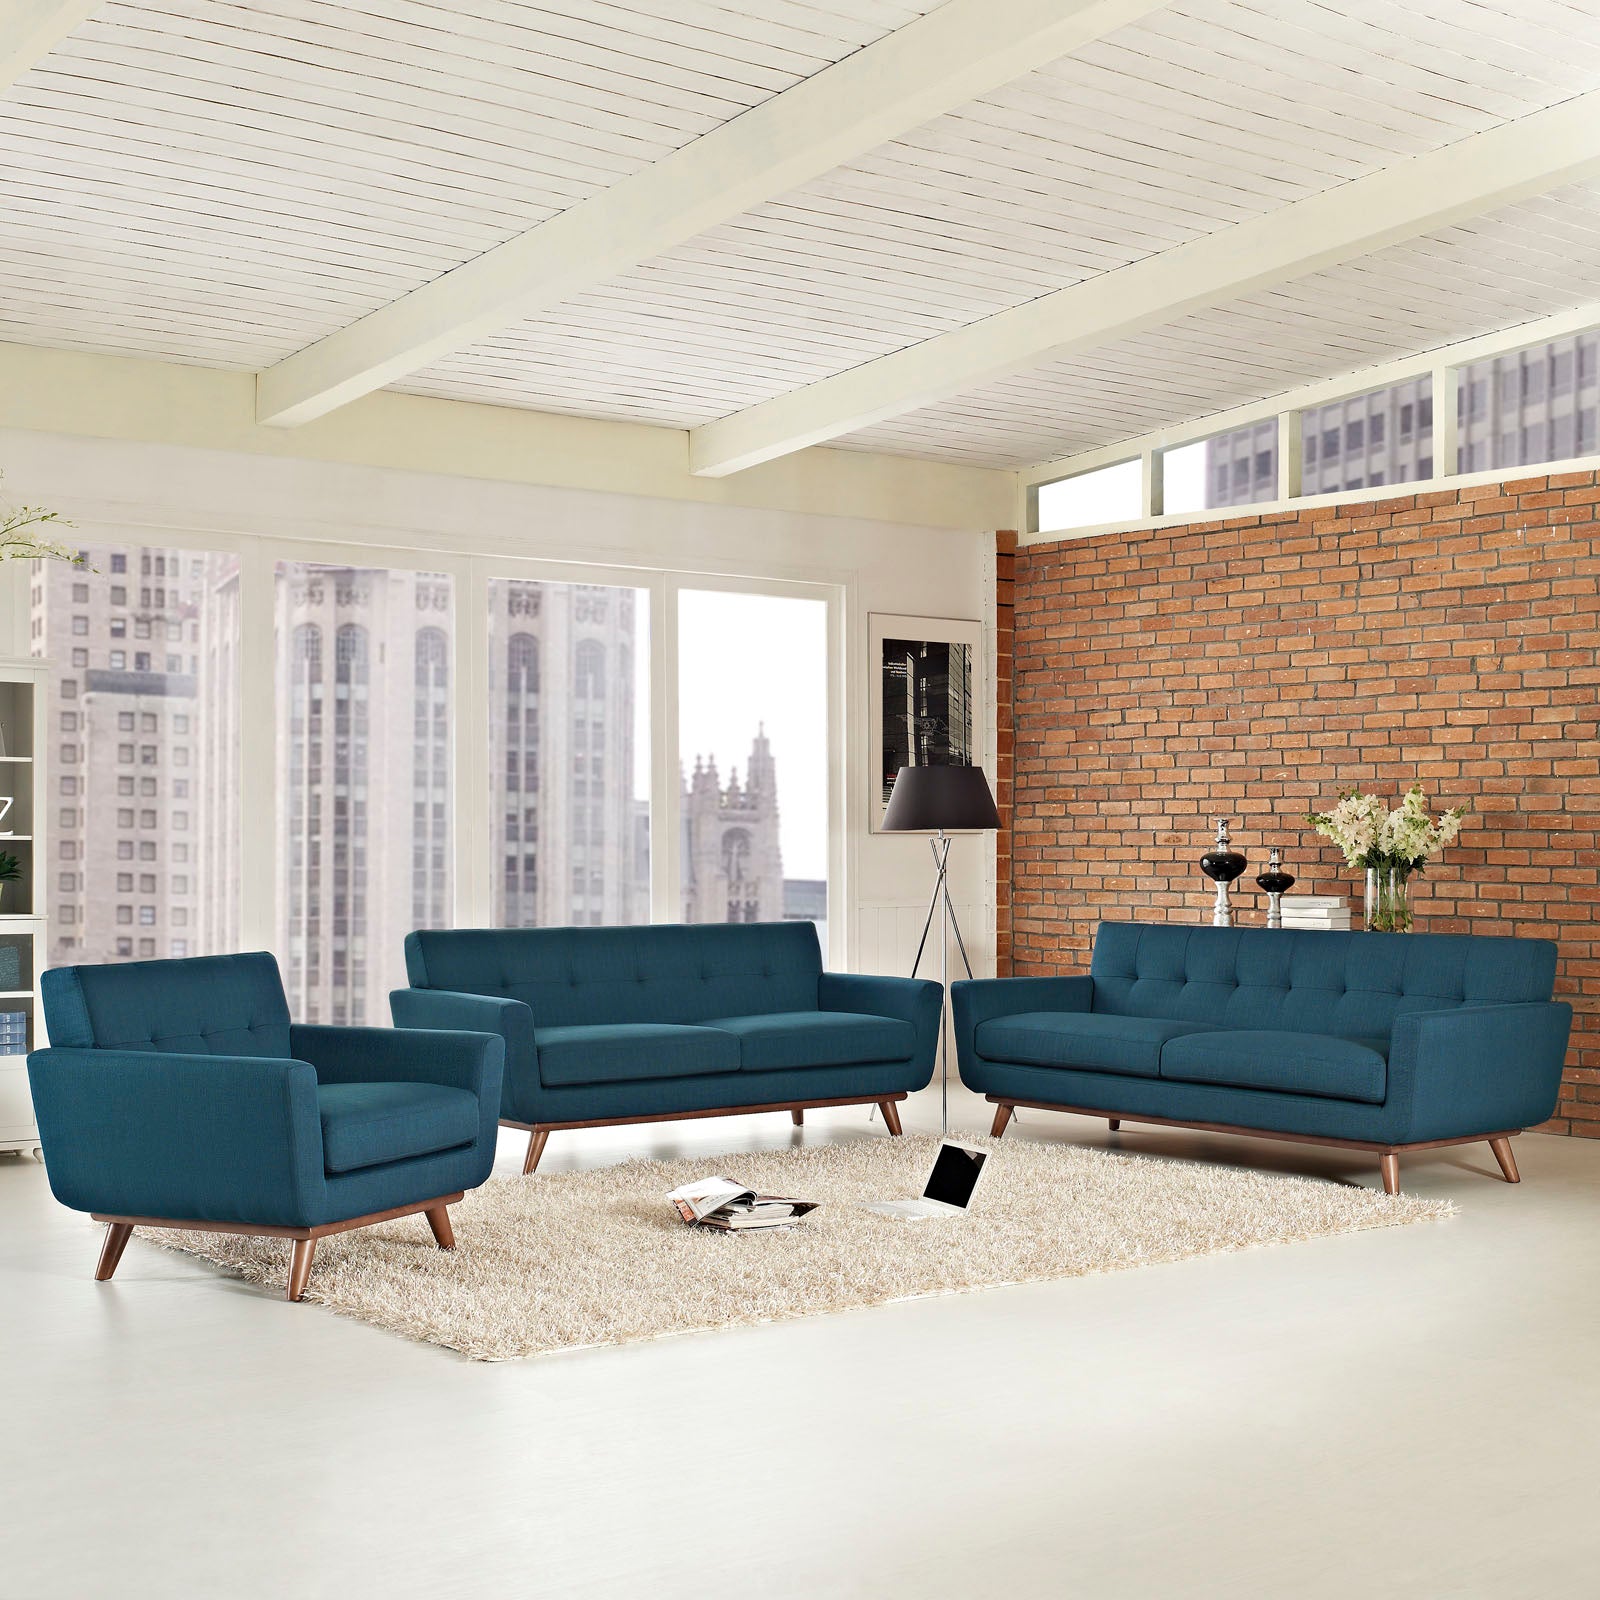 Modway Living Room Sets - Engage Sofa Loveseat and Armchair Set of 3 Azure